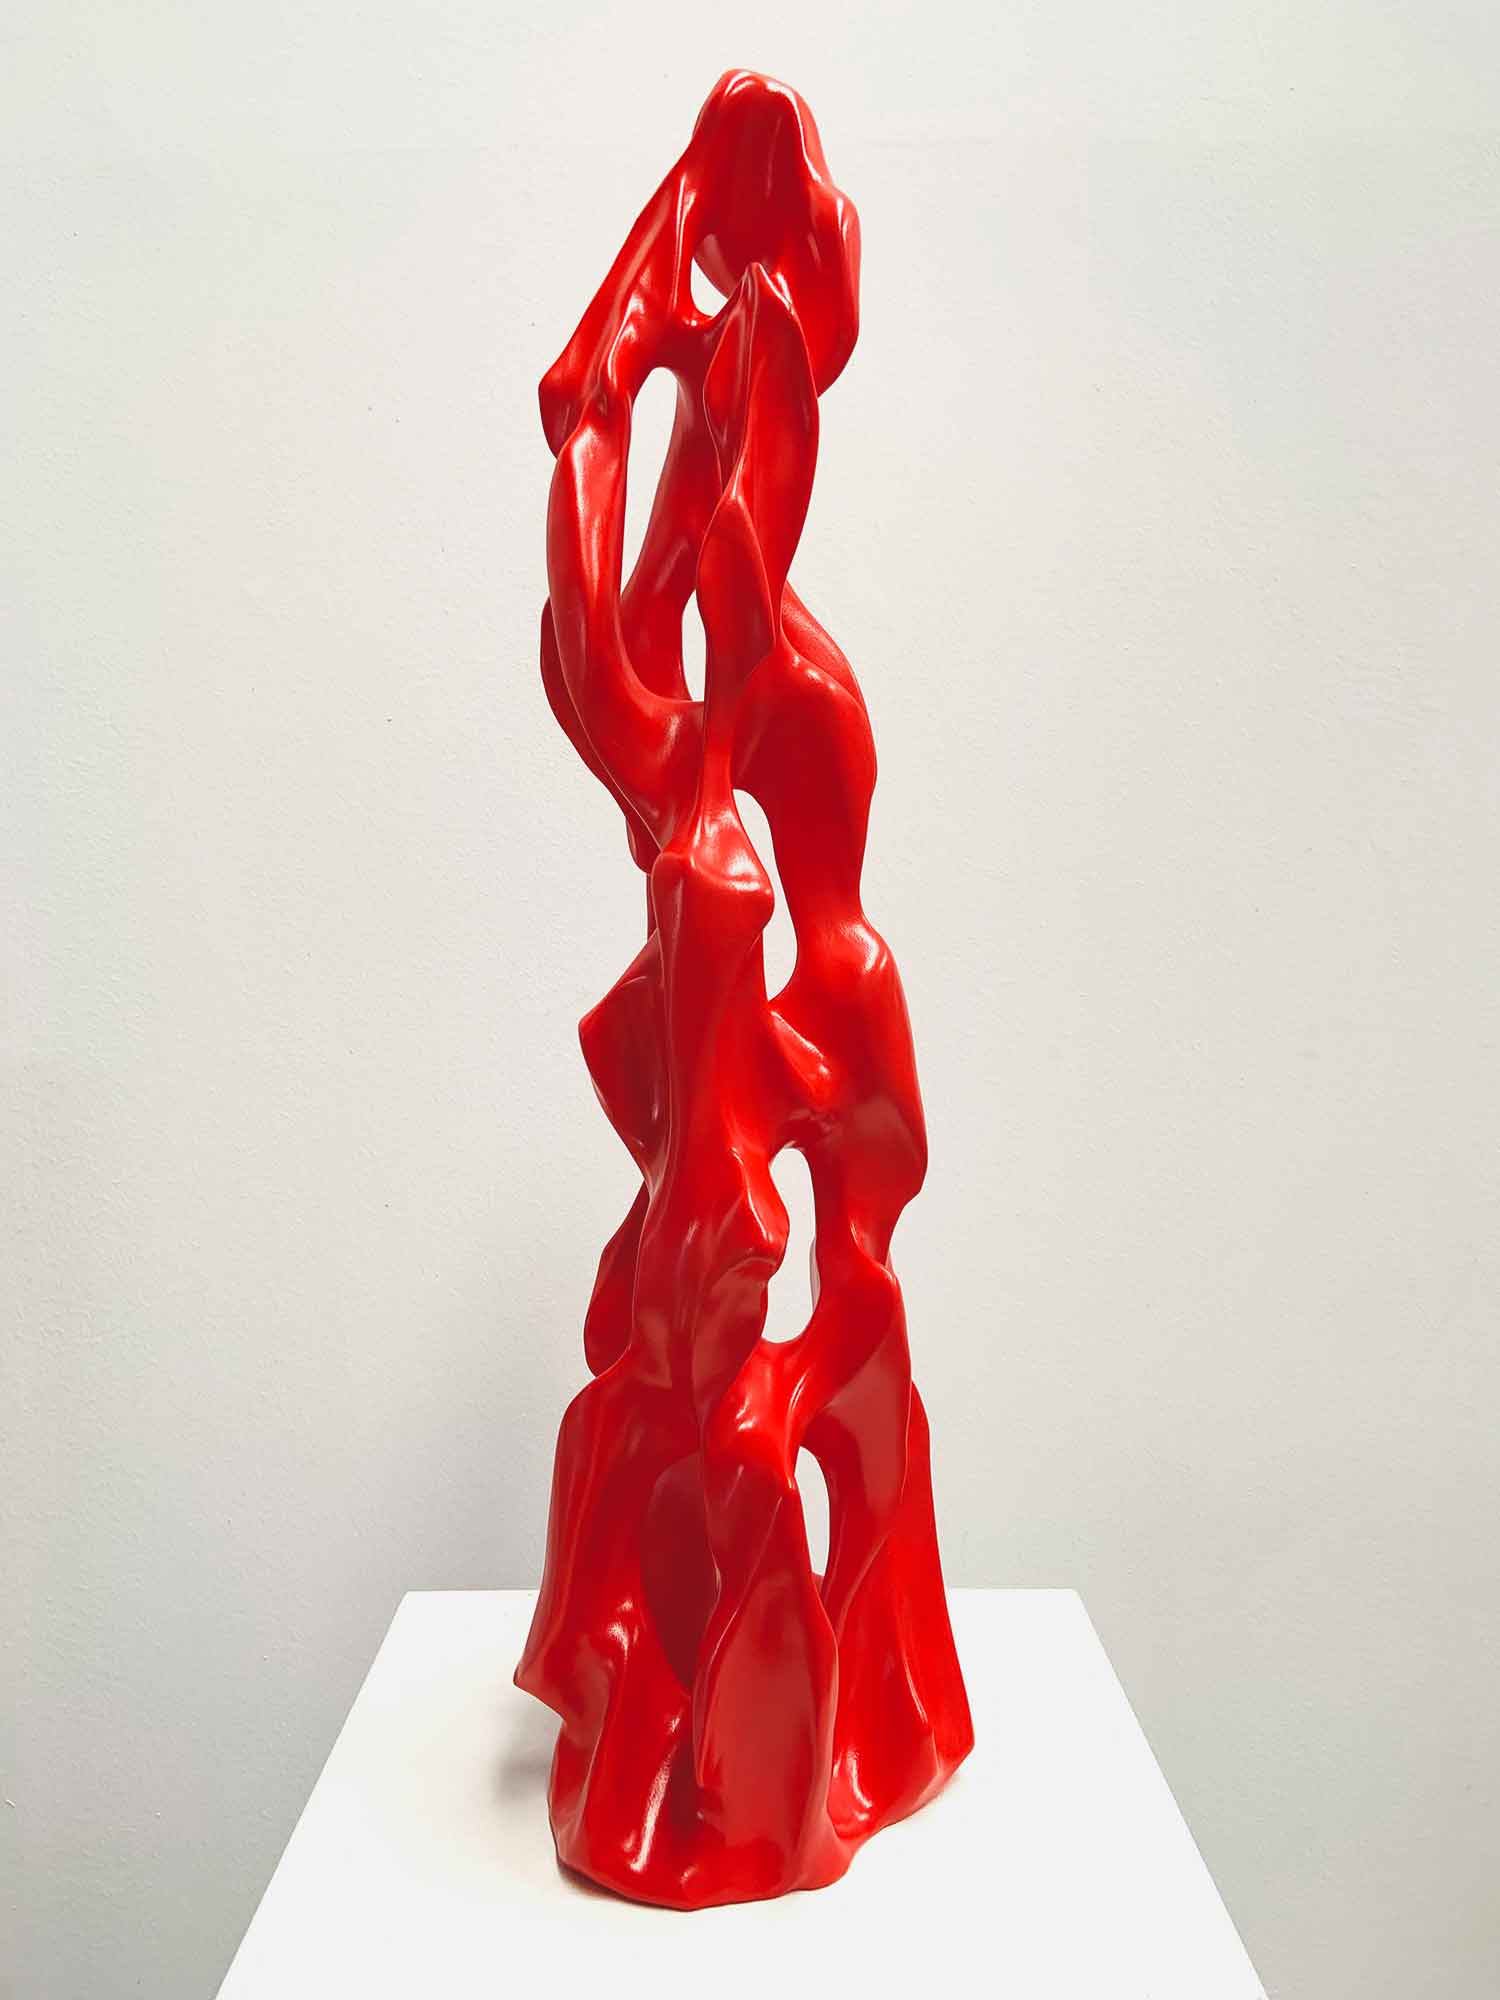 Red sculpture of organic shapes